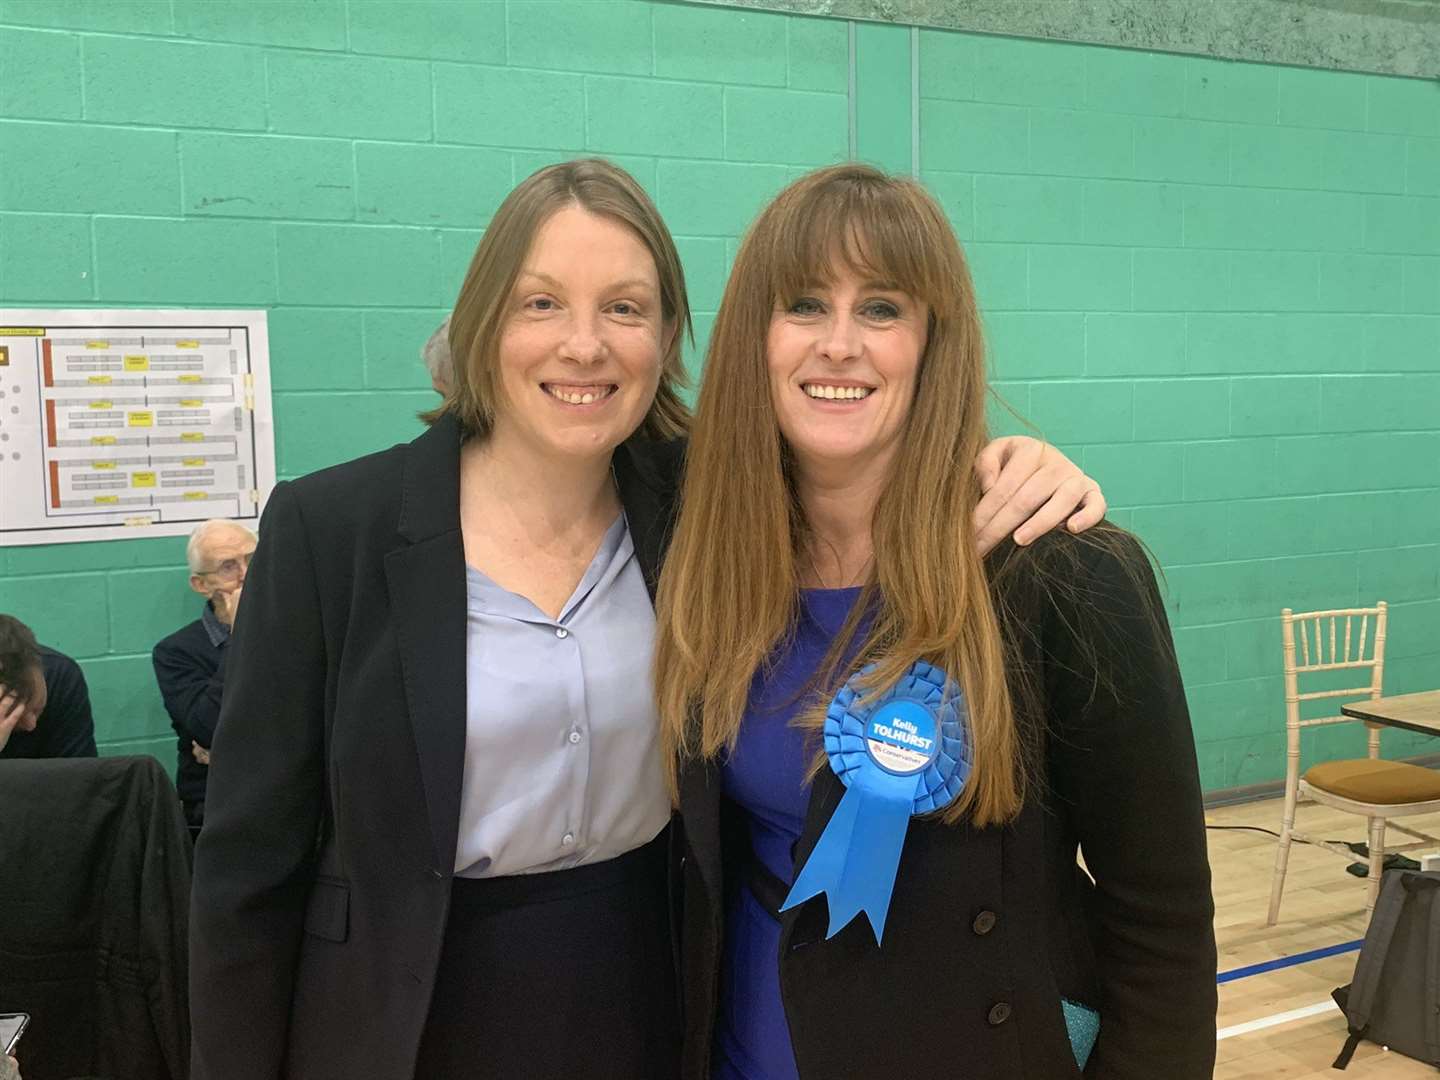 Tracey Crouch and Kelly Tolhurst extended their majorities by huge amounts